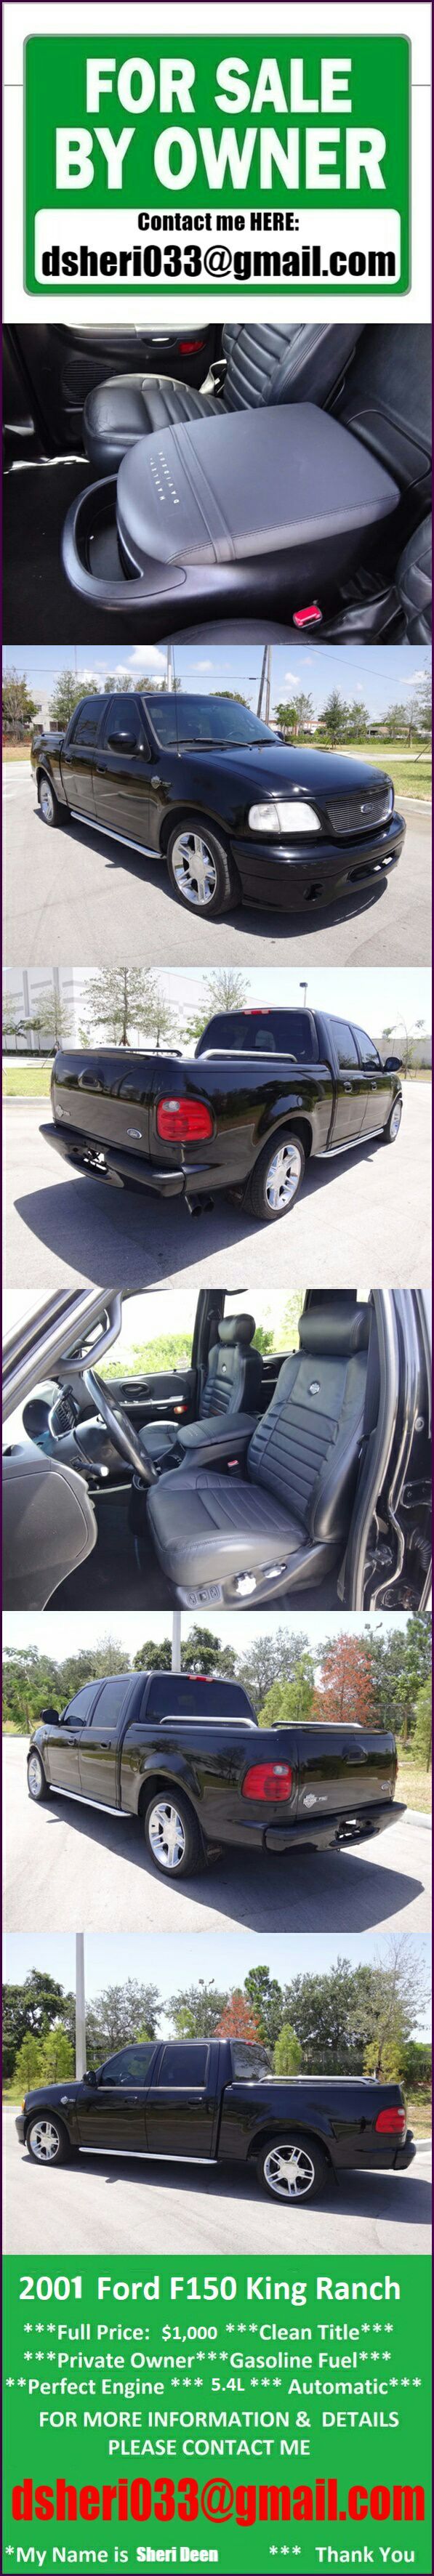 Mp3 Player2001 Ford F150 Black Leather!!!